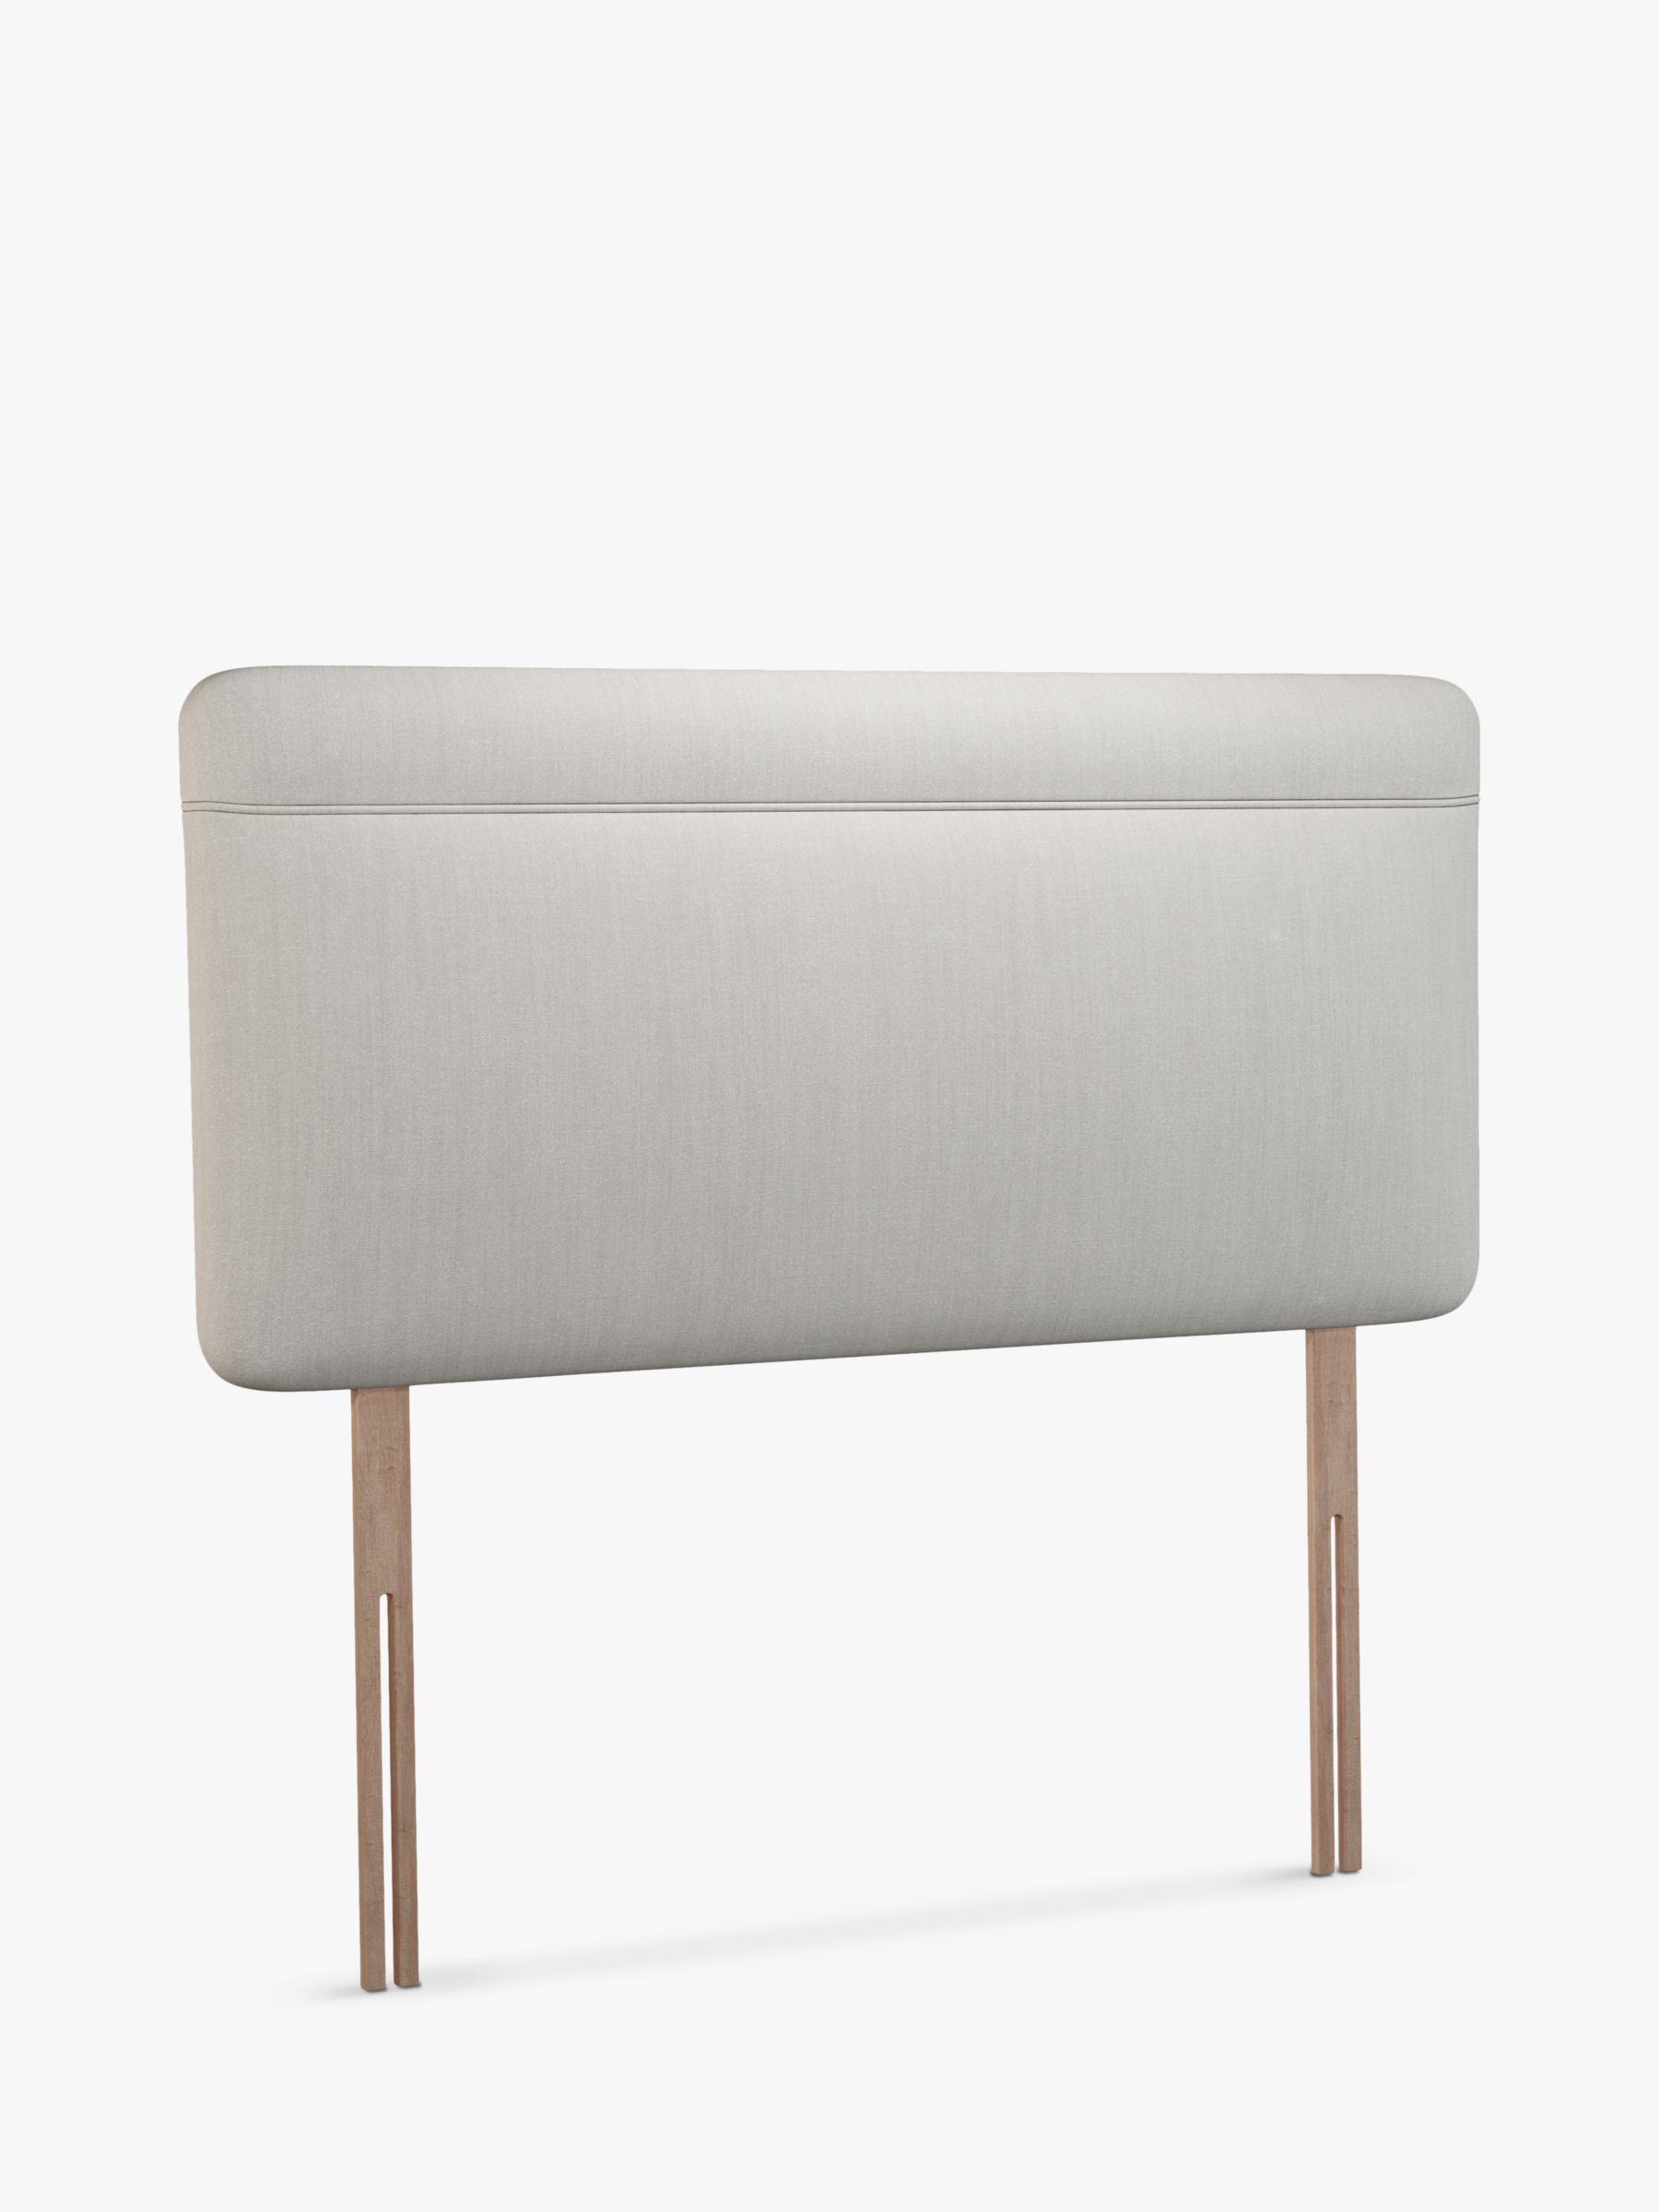 John Lewis Theale Upholstered Headboard, Double, Relaxed Linen Putty